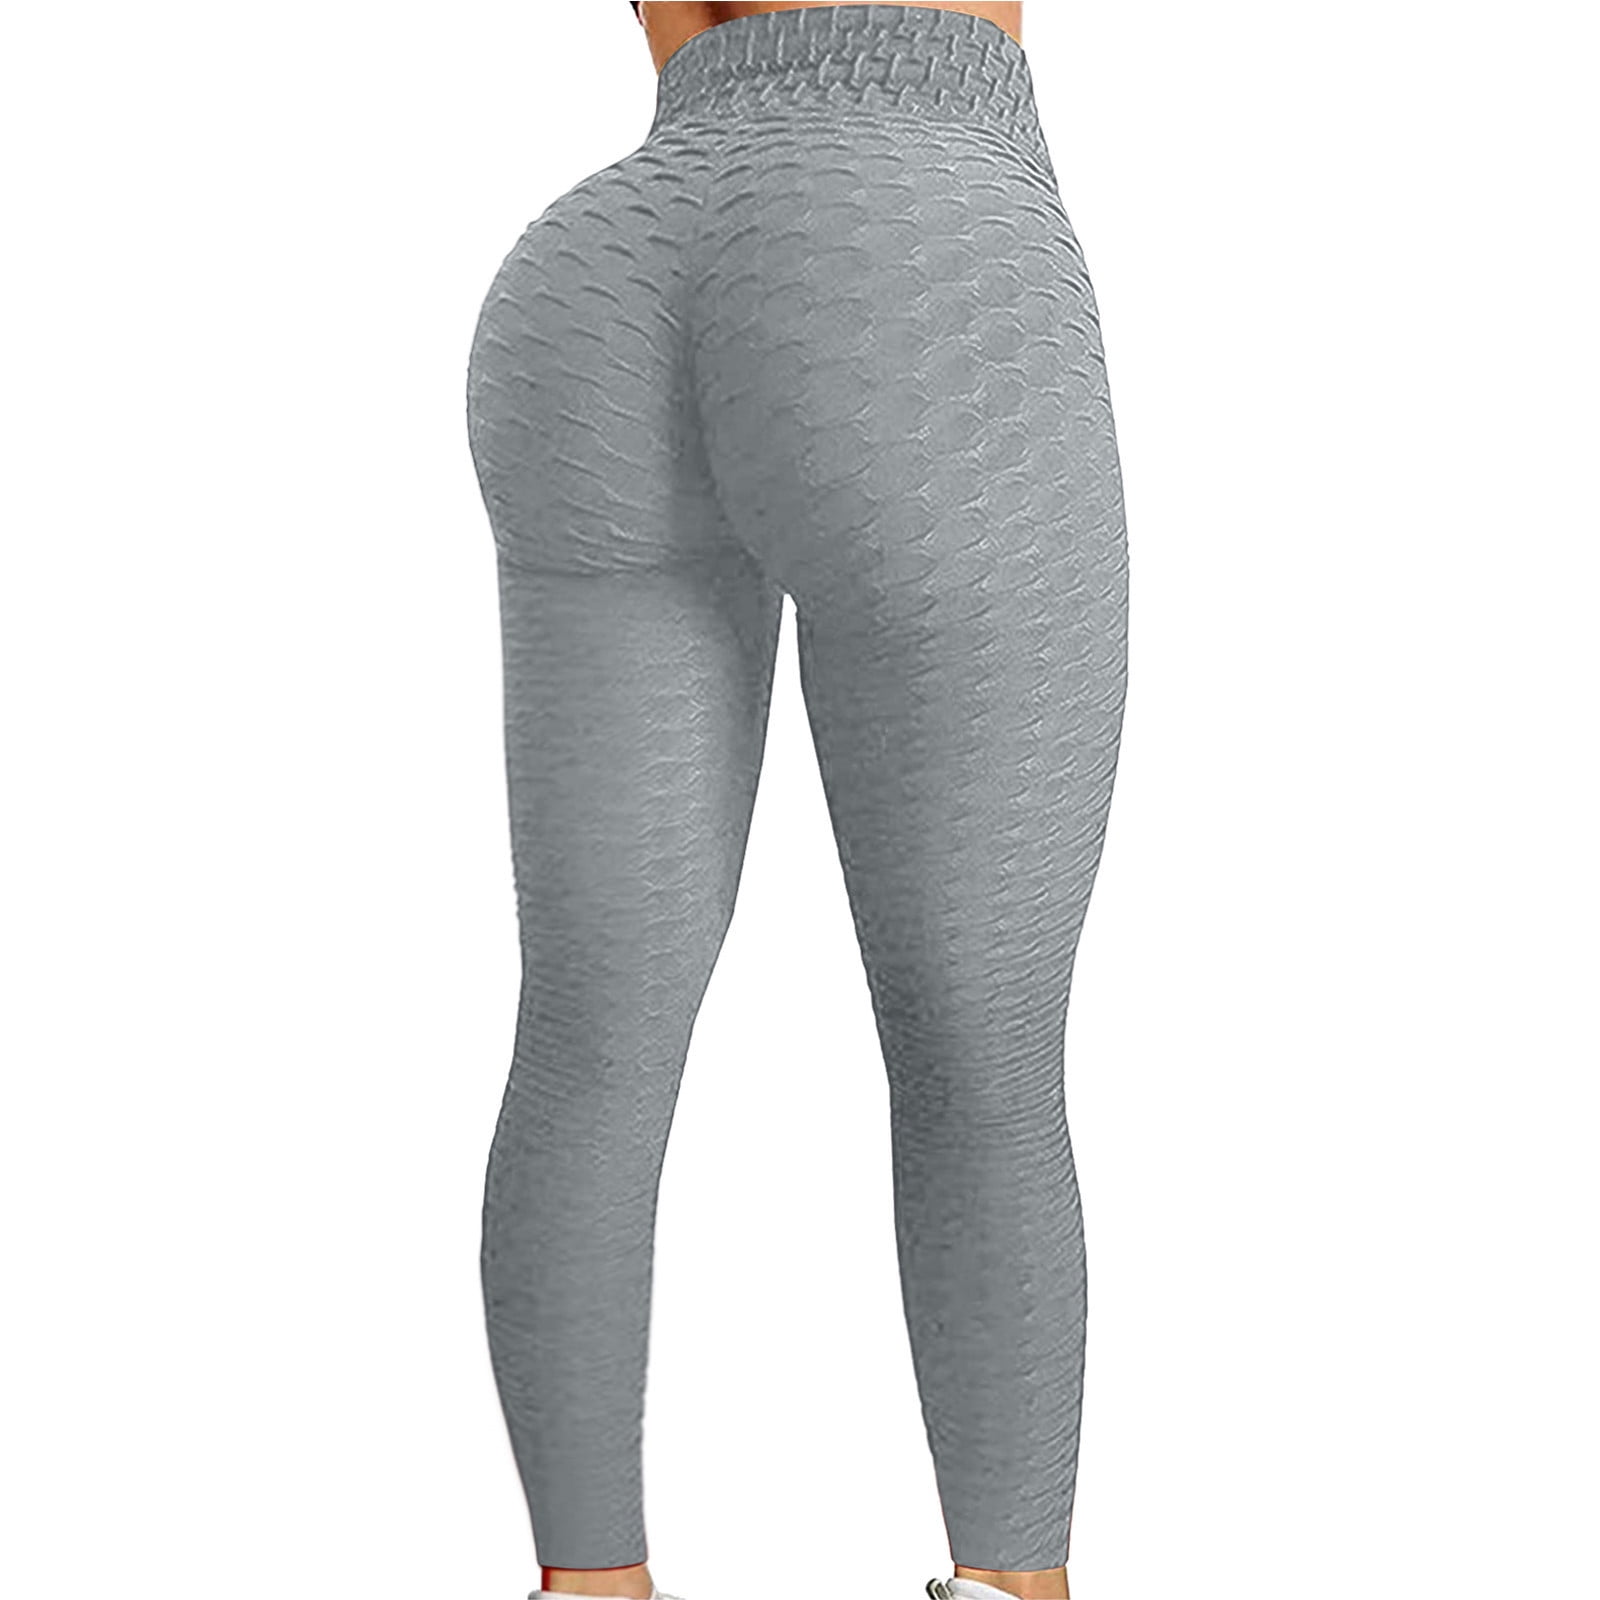 2023 Womens Active Scrunch Leggings For Gym, Yoga, And Sports Gray